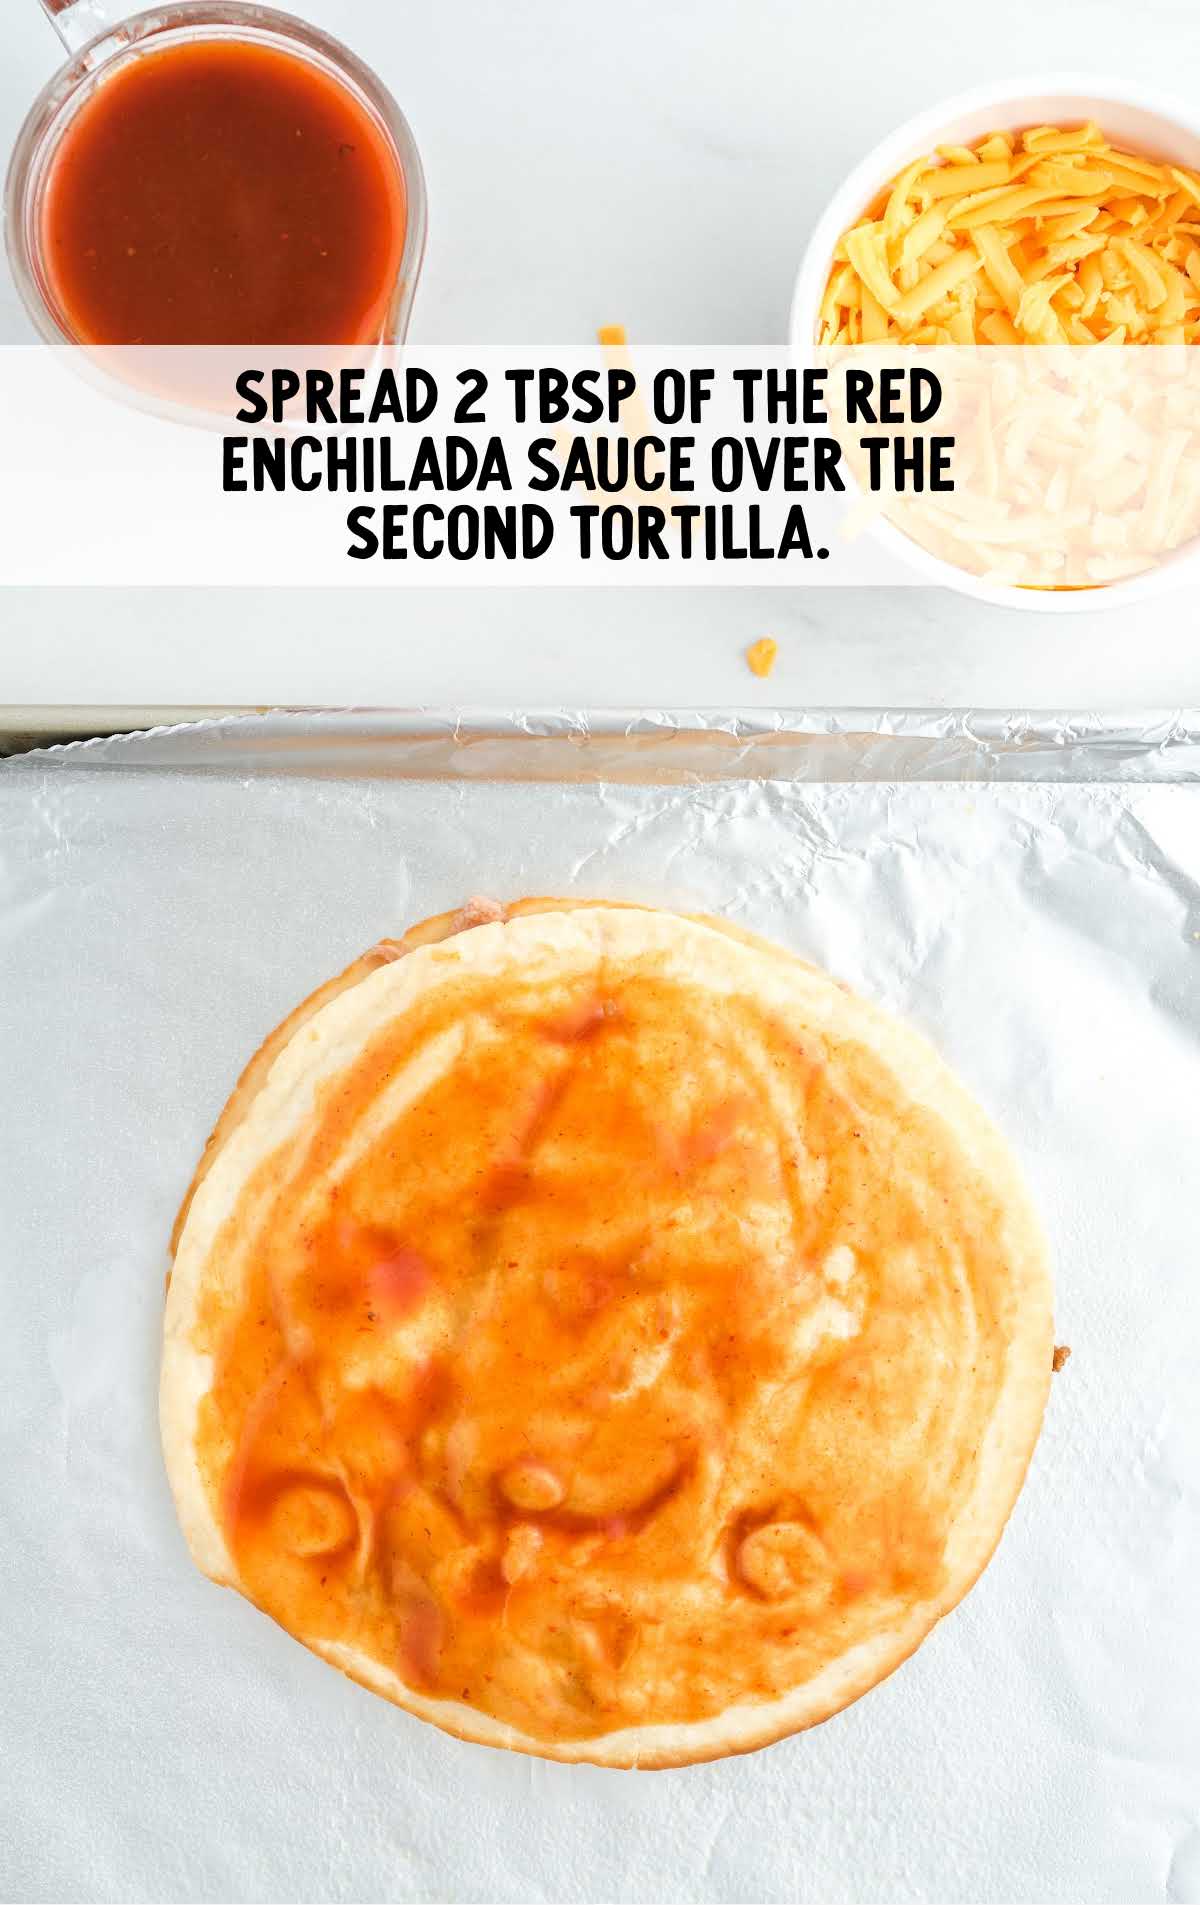 red enchilada sauce spread over the second tortilla